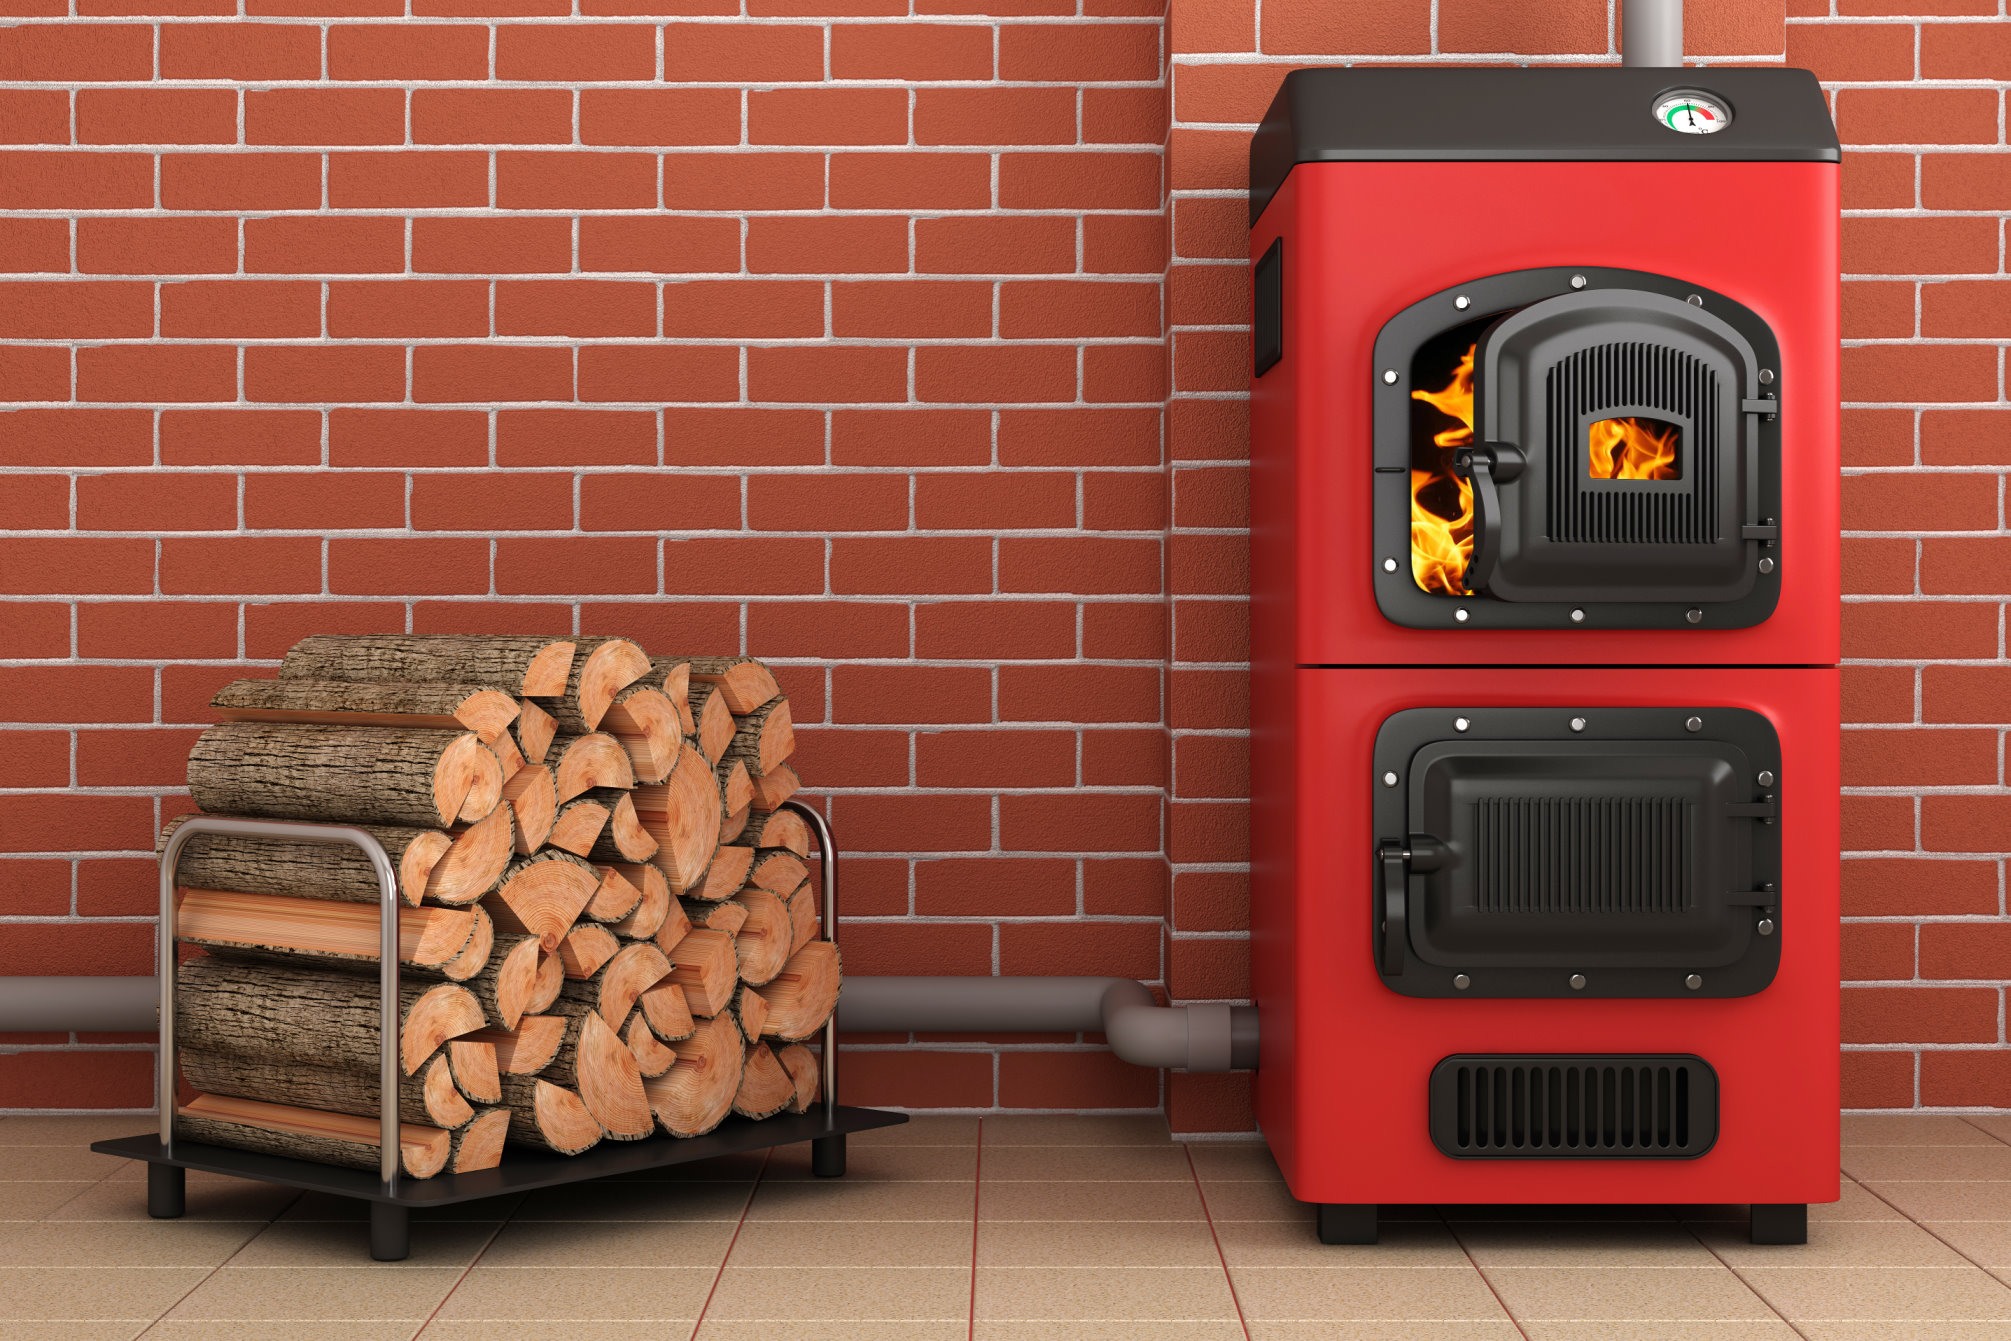 What are sustainable alternatives to gas boilers?